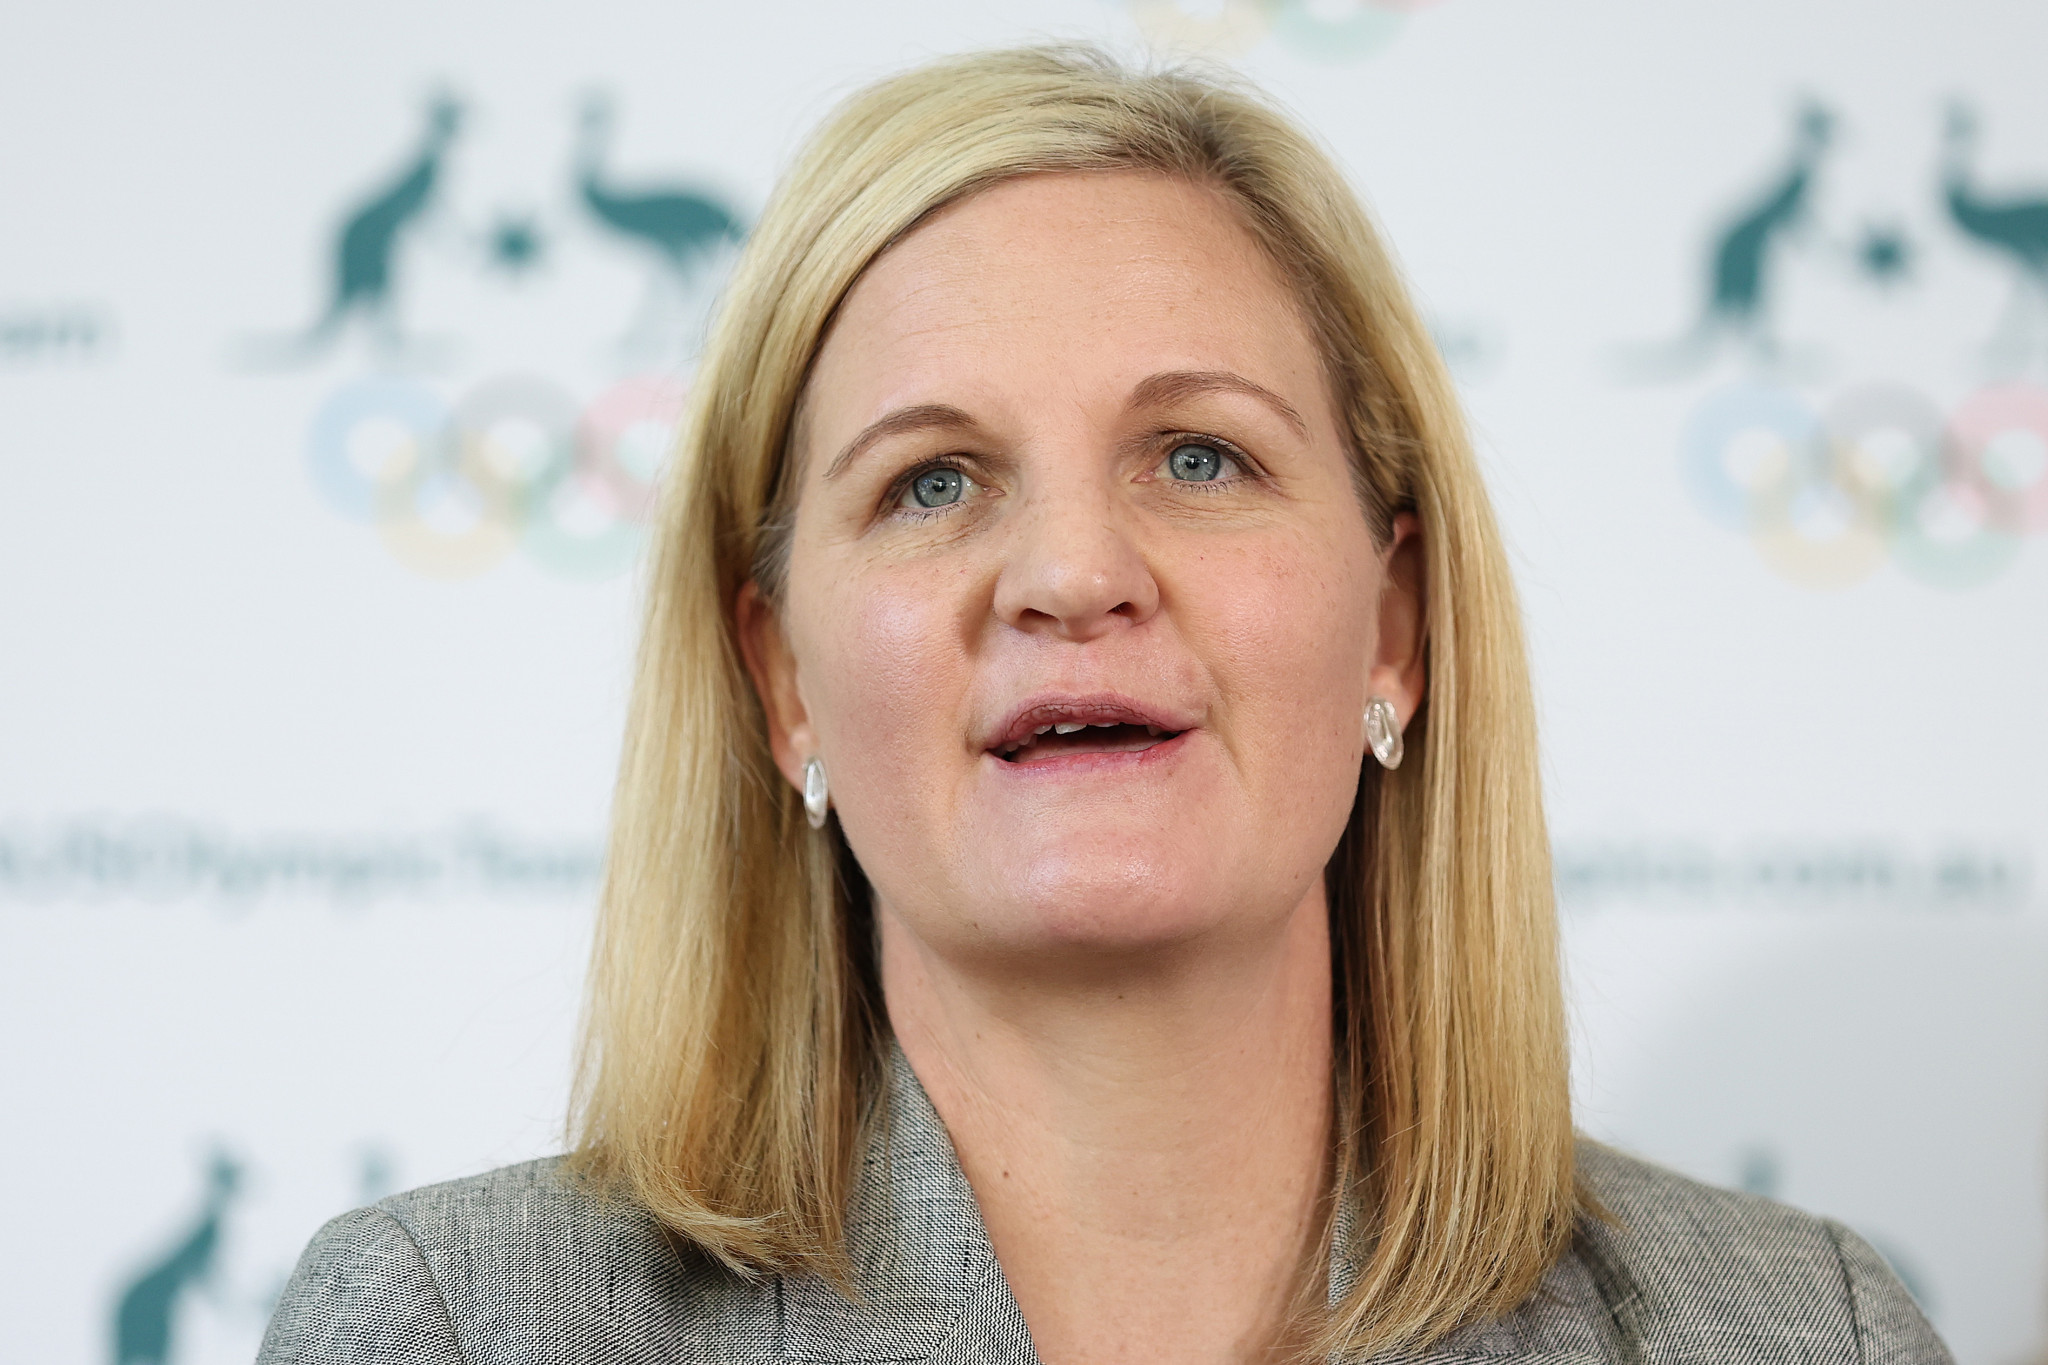 Chair of the IOC Coordination Commission for Dakar 2026 Kirsty Coventry said the planned educational activities blended sport, art and music with the goal of connecting with young people ©Getty Images